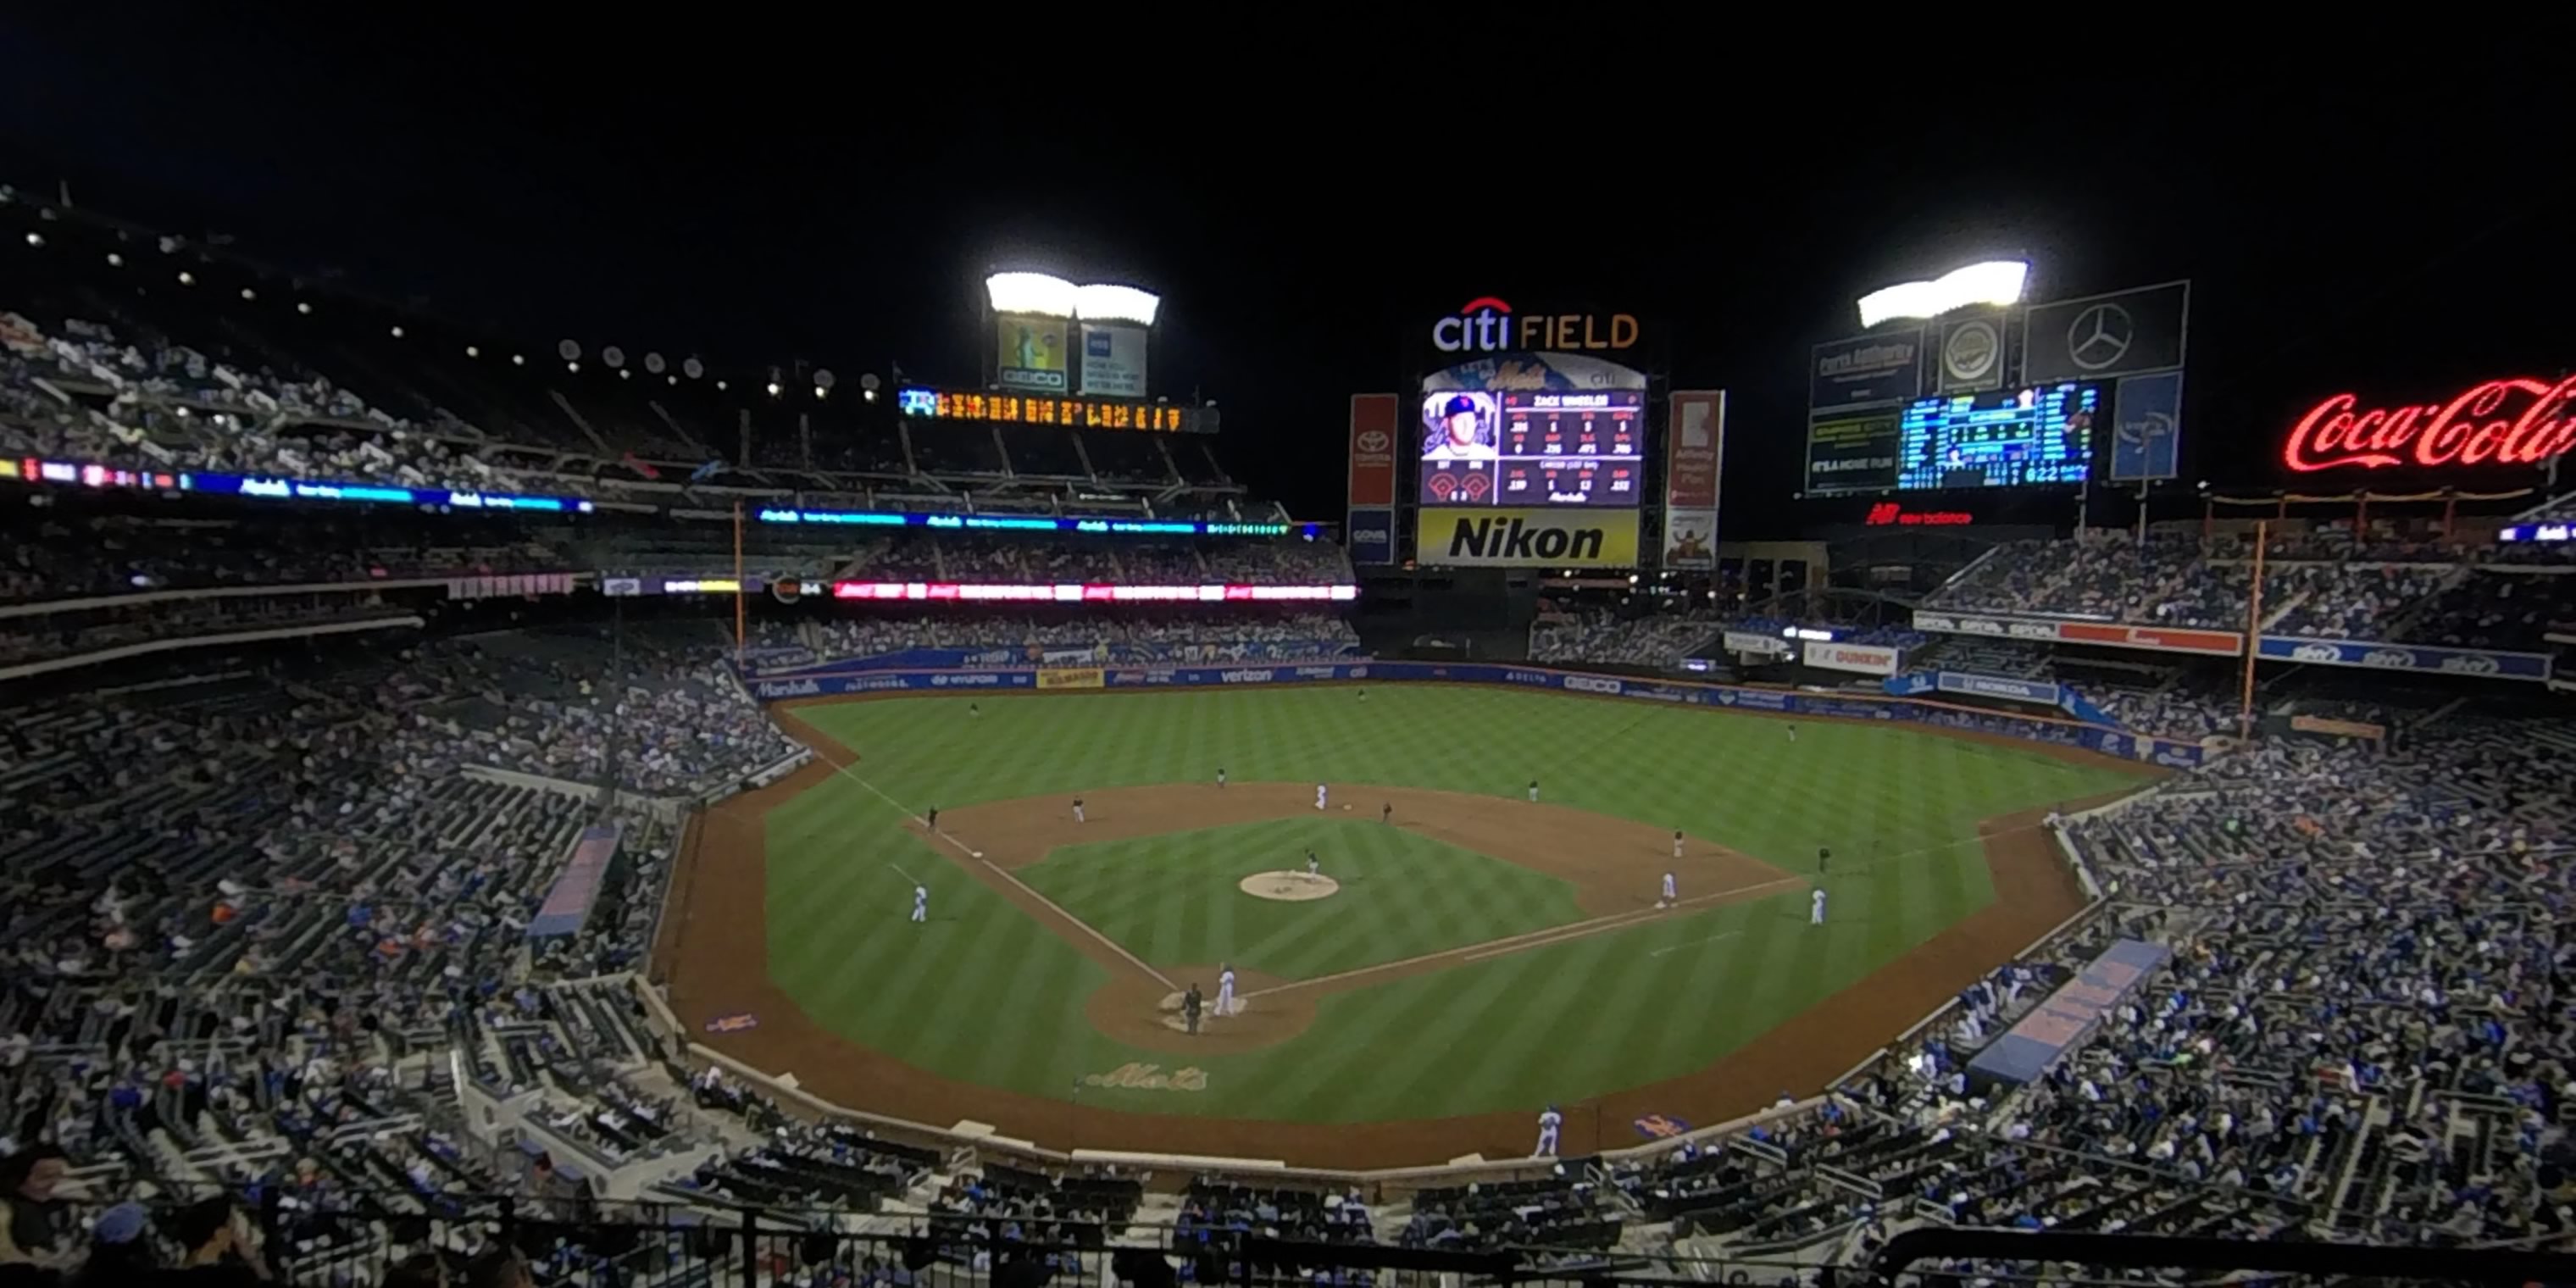 section 317 panoramic seat view  - citi field